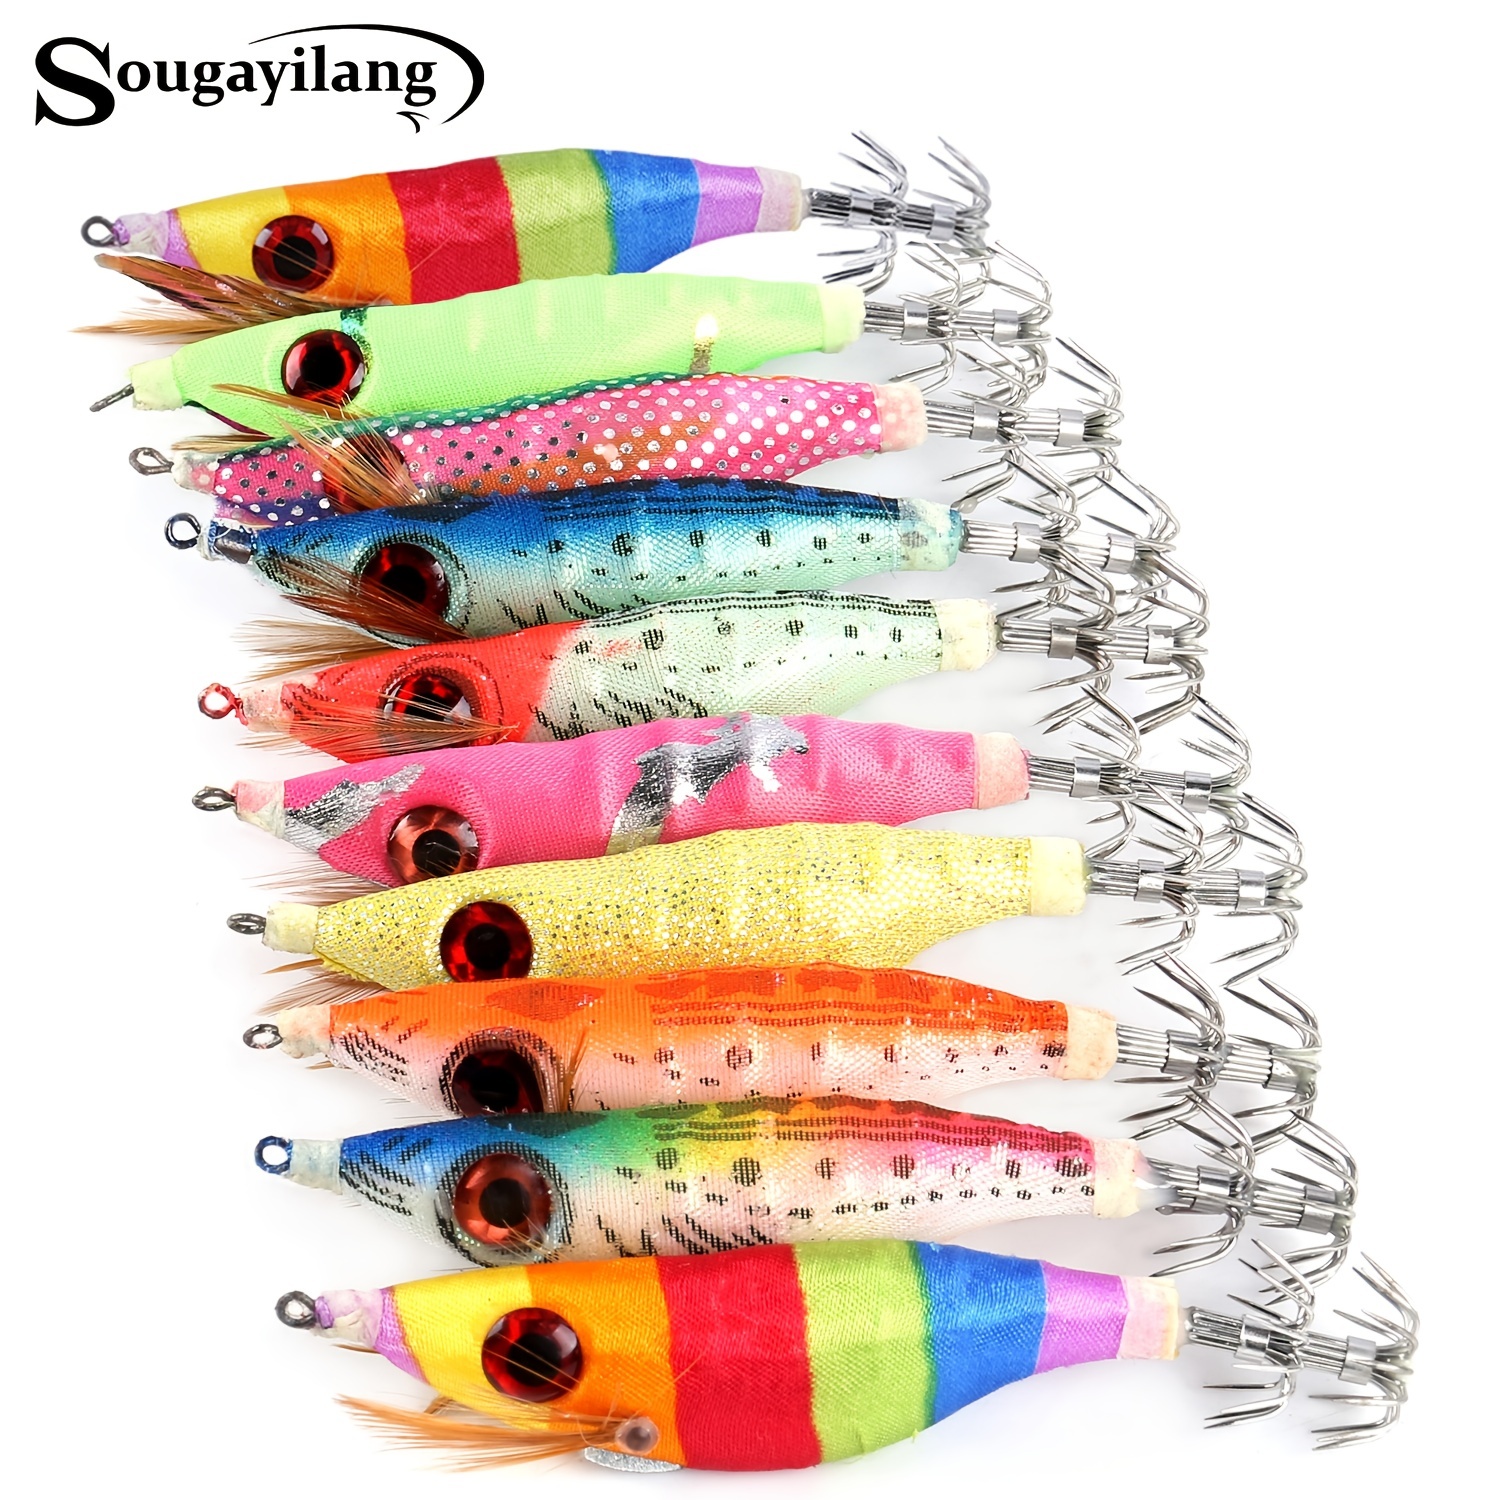 10pcs Sougayilang Glow-in-the-Dark Fishing Lures Kit - Wood Shrimp, Jig  Hooks & Artificial Spinner Lures - Perfect For Nighttime Fishing!